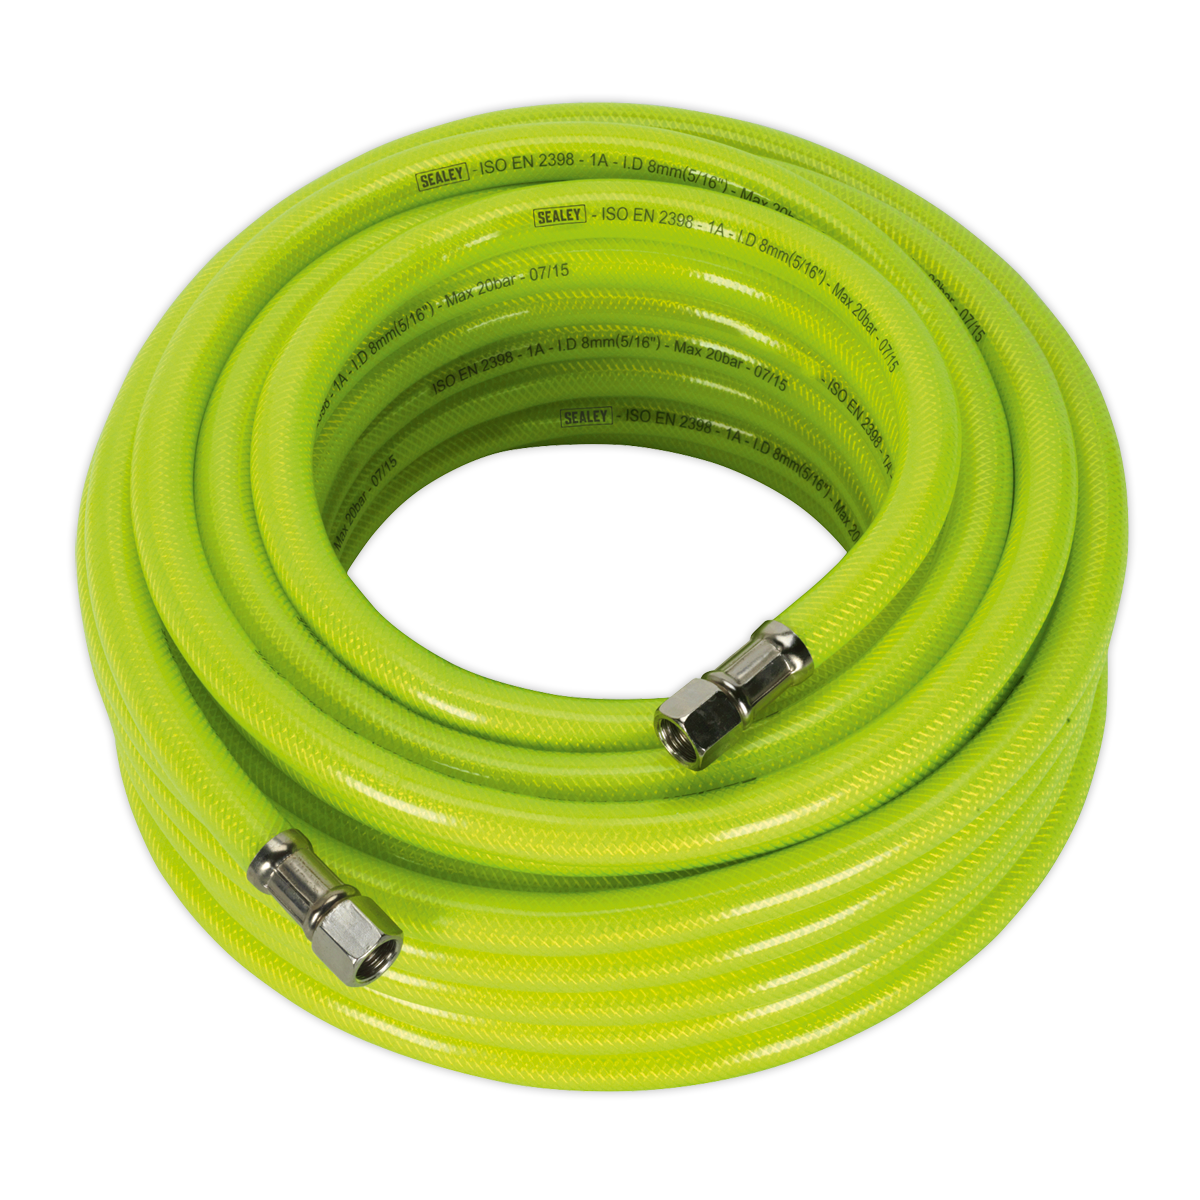 Sealey 15m x Ø8mm High-Visibility Air Hose with 1/4"BSP Unions AHFC15